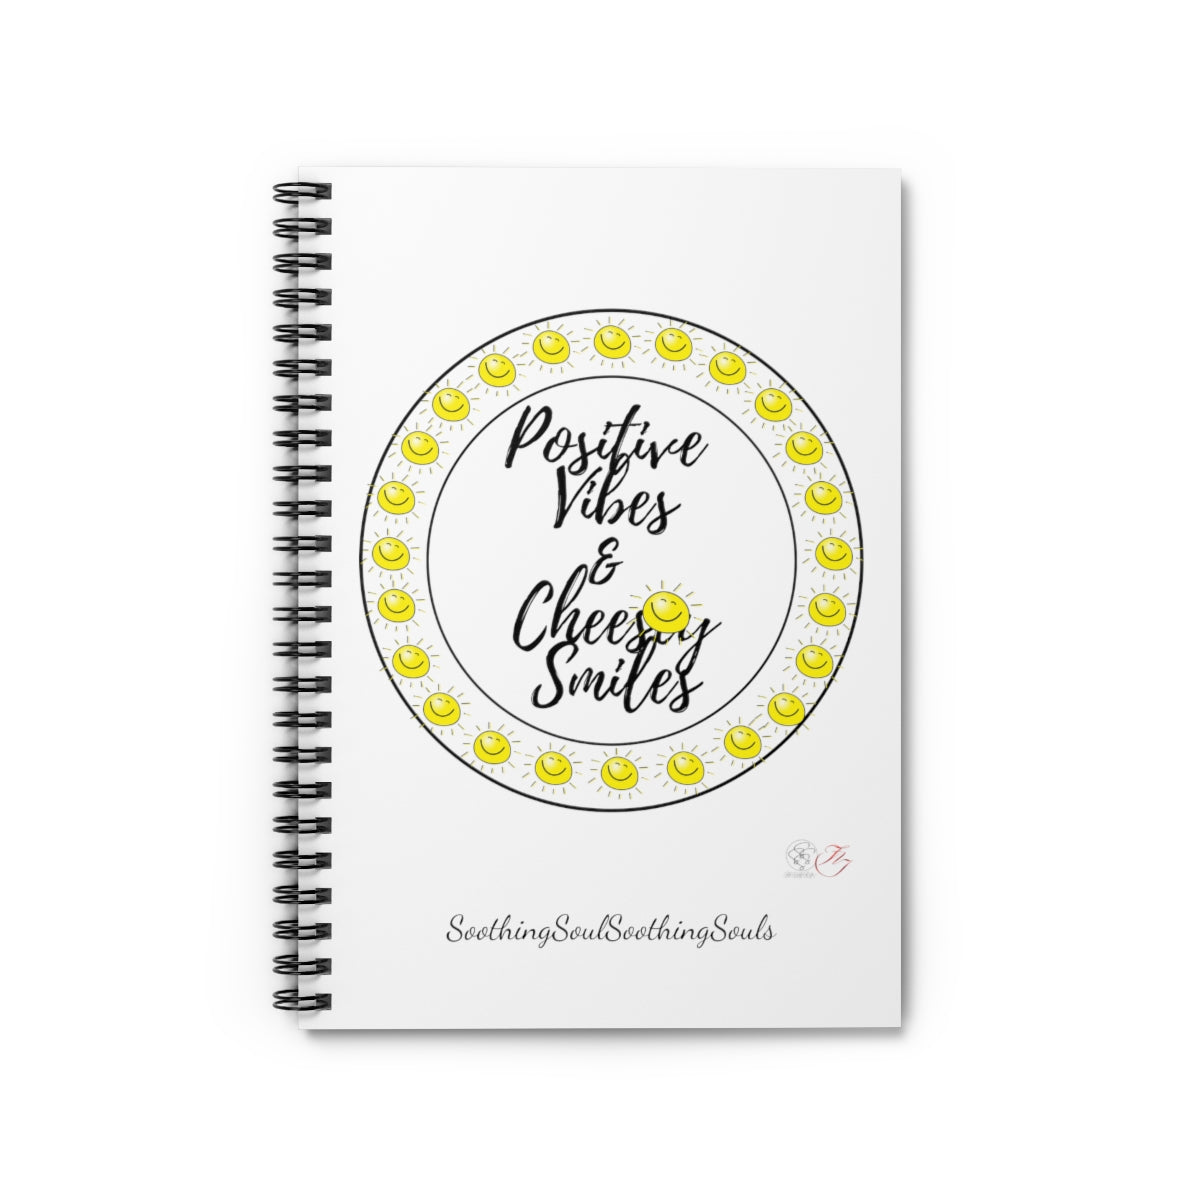 SSSS Positive Vibes & Cheesey Smiles Notebook White (BL)